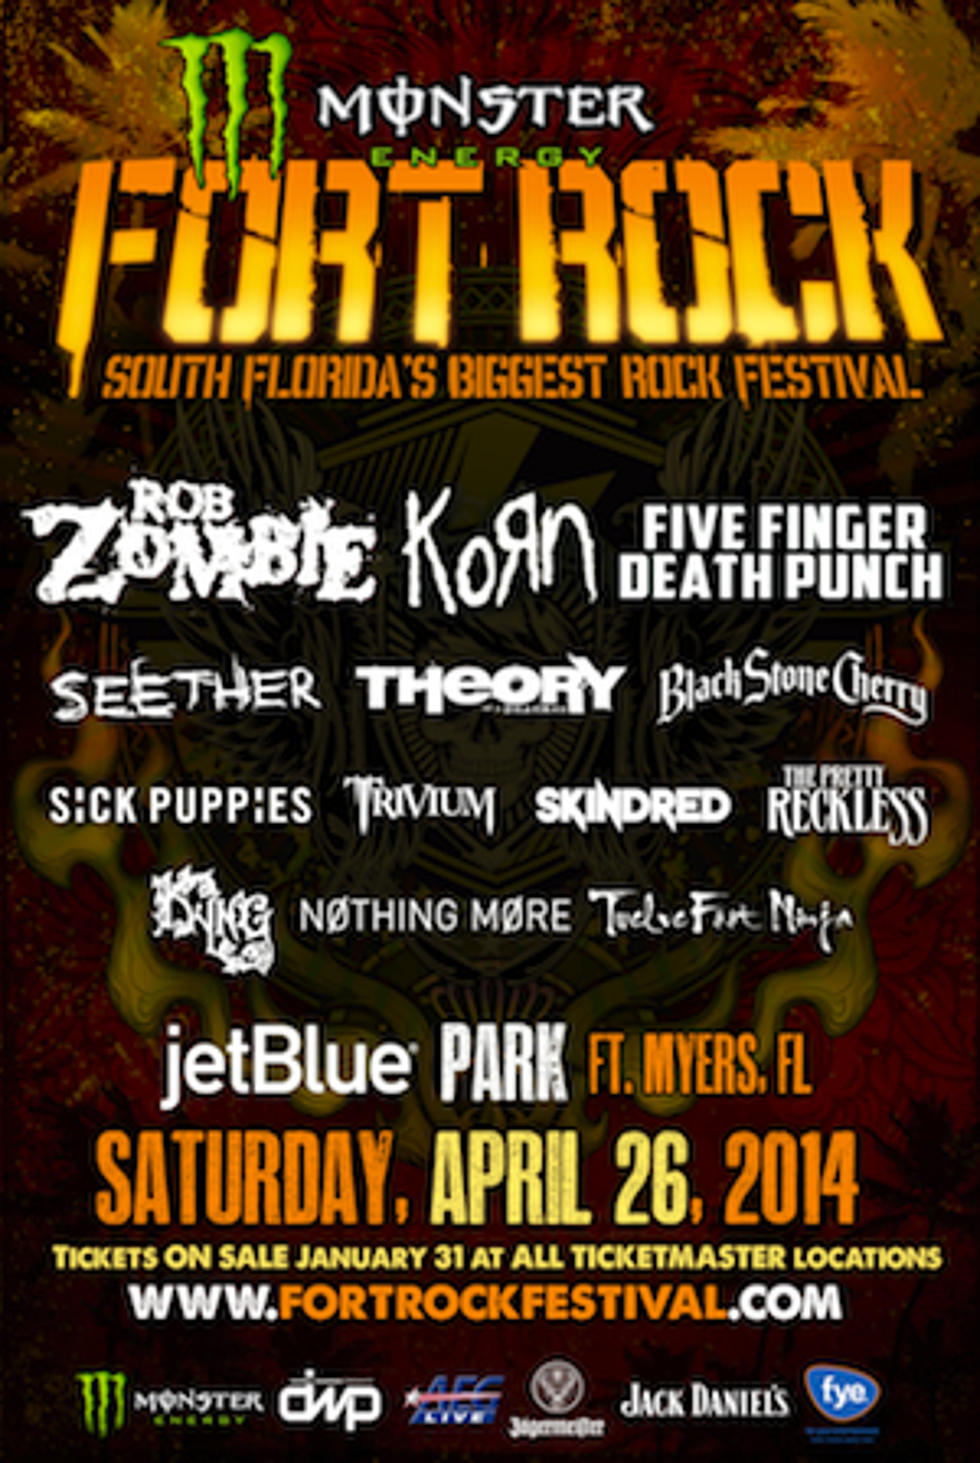 Korn, Rob Zombie and Five Finger Death Punch Headline 2014 Fort Rock Festival